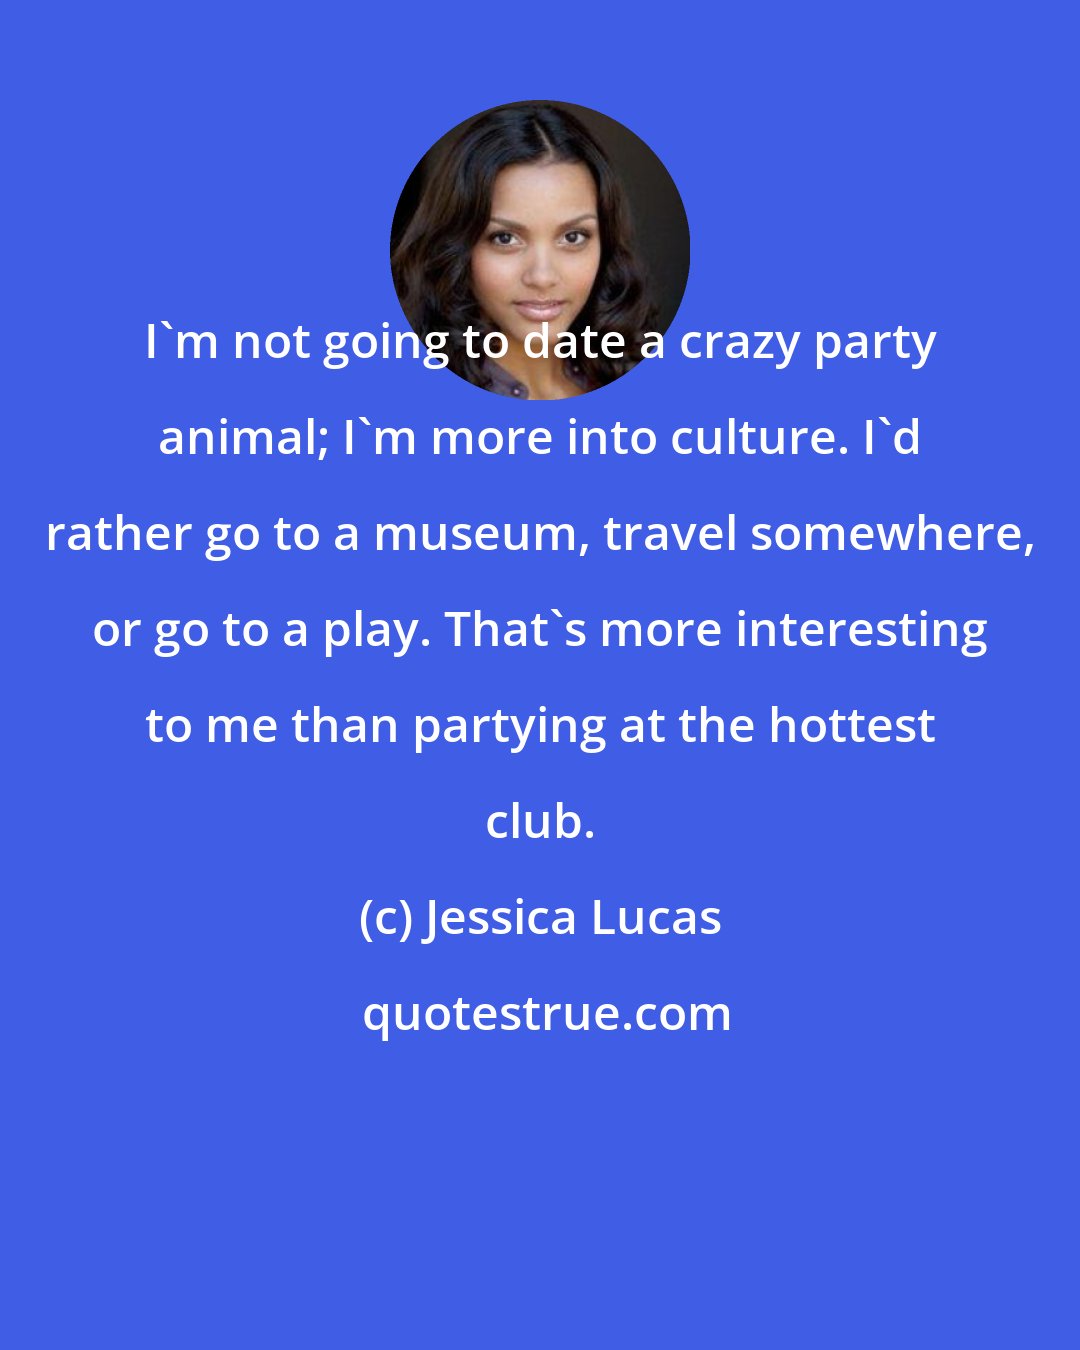 Jessica Lucas: I'm not going to date a crazy party animal; I'm more into culture. I'd rather go to a museum, travel somewhere, or go to a play. That's more interesting to me than partying at the hottest club.